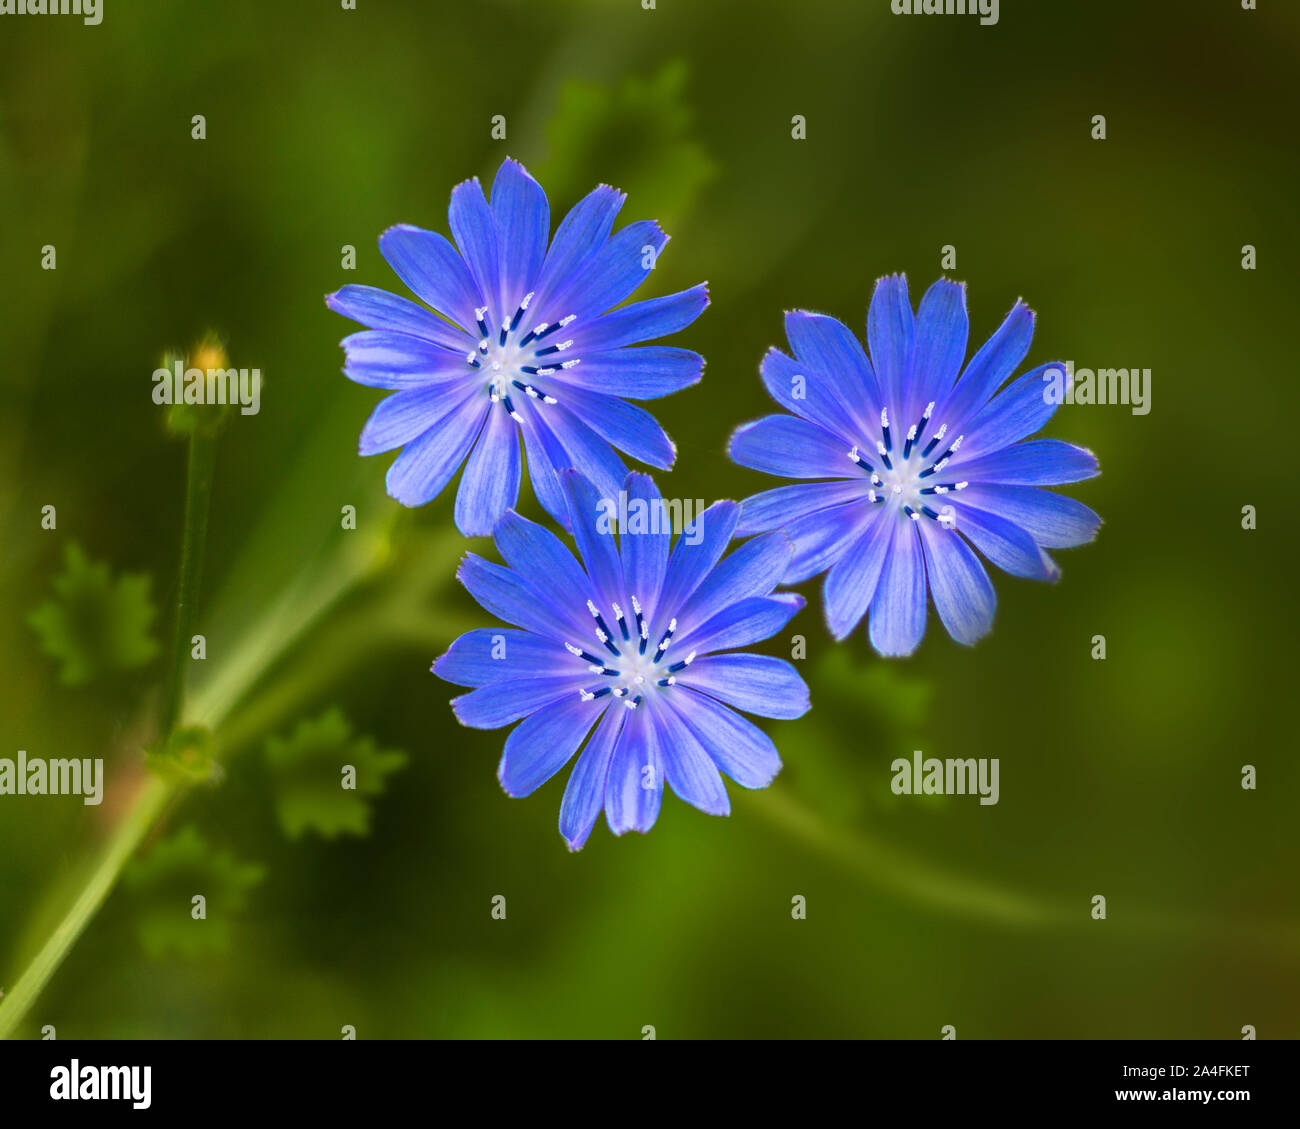 Common chicory or willd chicory flower, family Asteraceae,usually with bright blue flowers. Rome Italy. Stock Photo